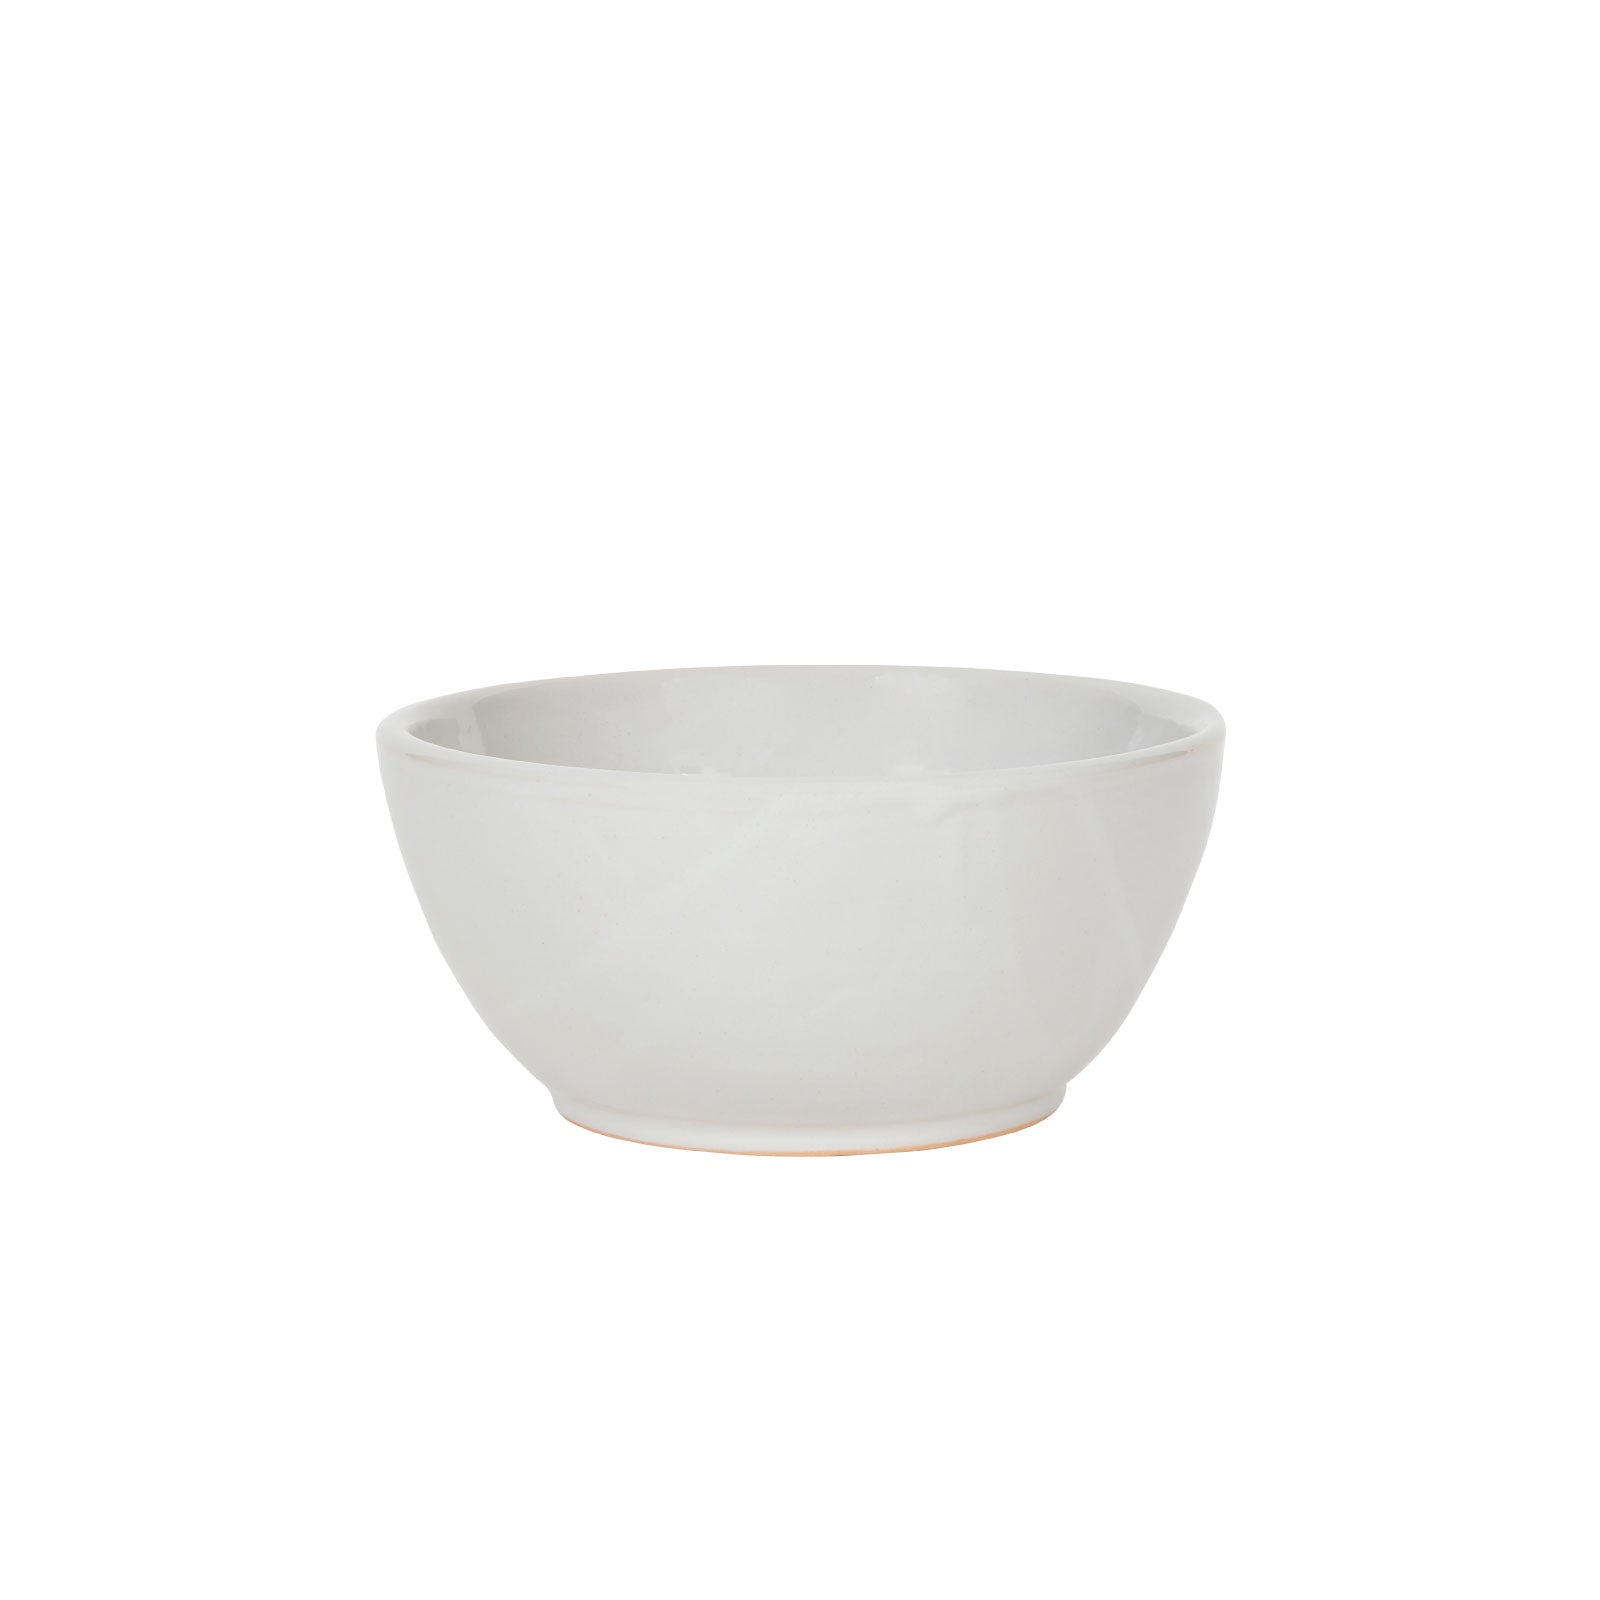 BH x etúHOME Small Ceramic Stacking Bowl in Grey